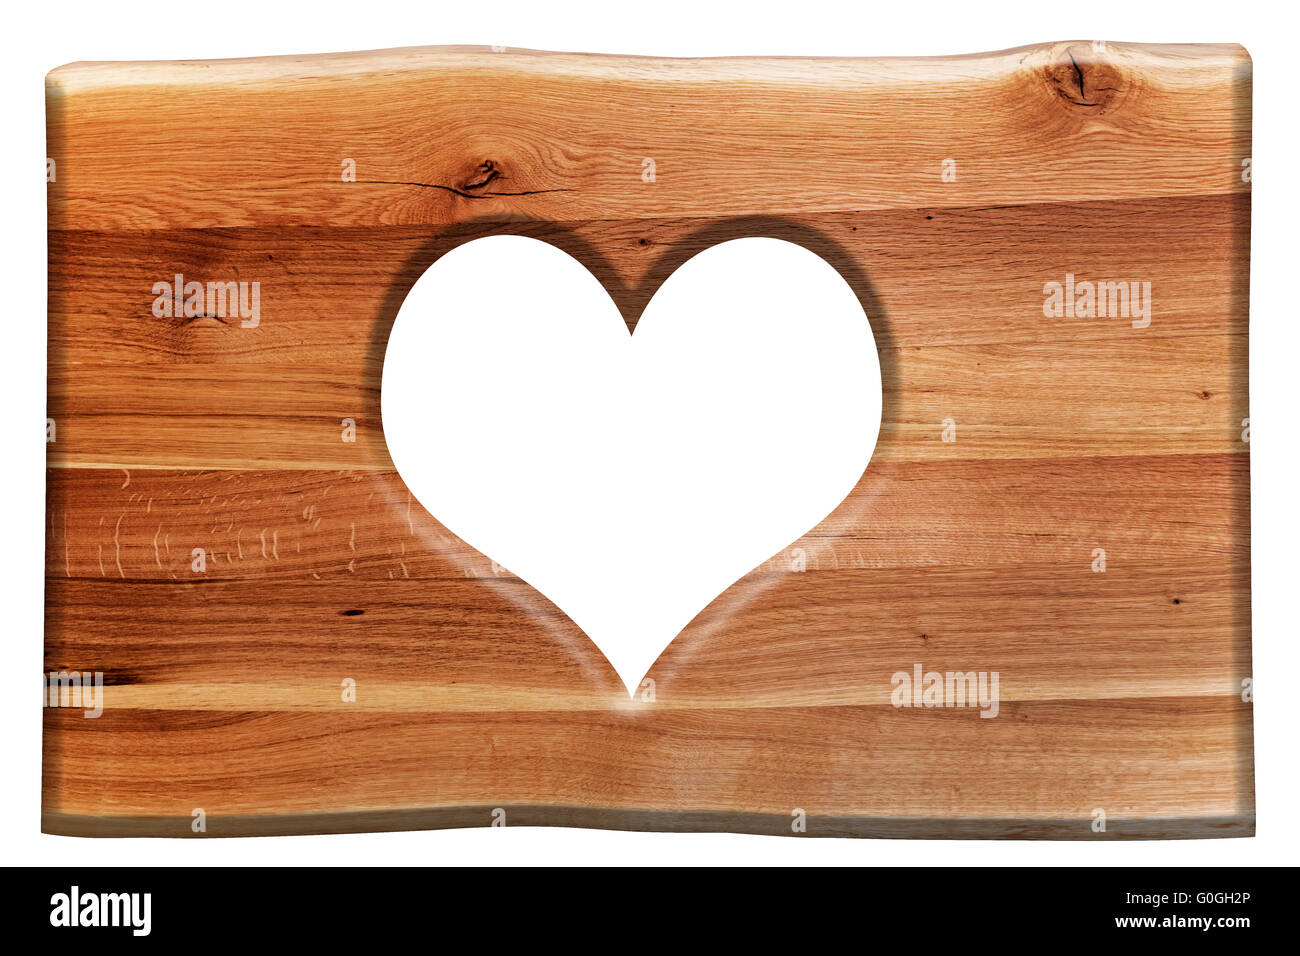 Heart shape cut in a wooden board isolated on white. Love symbol Stock Photo